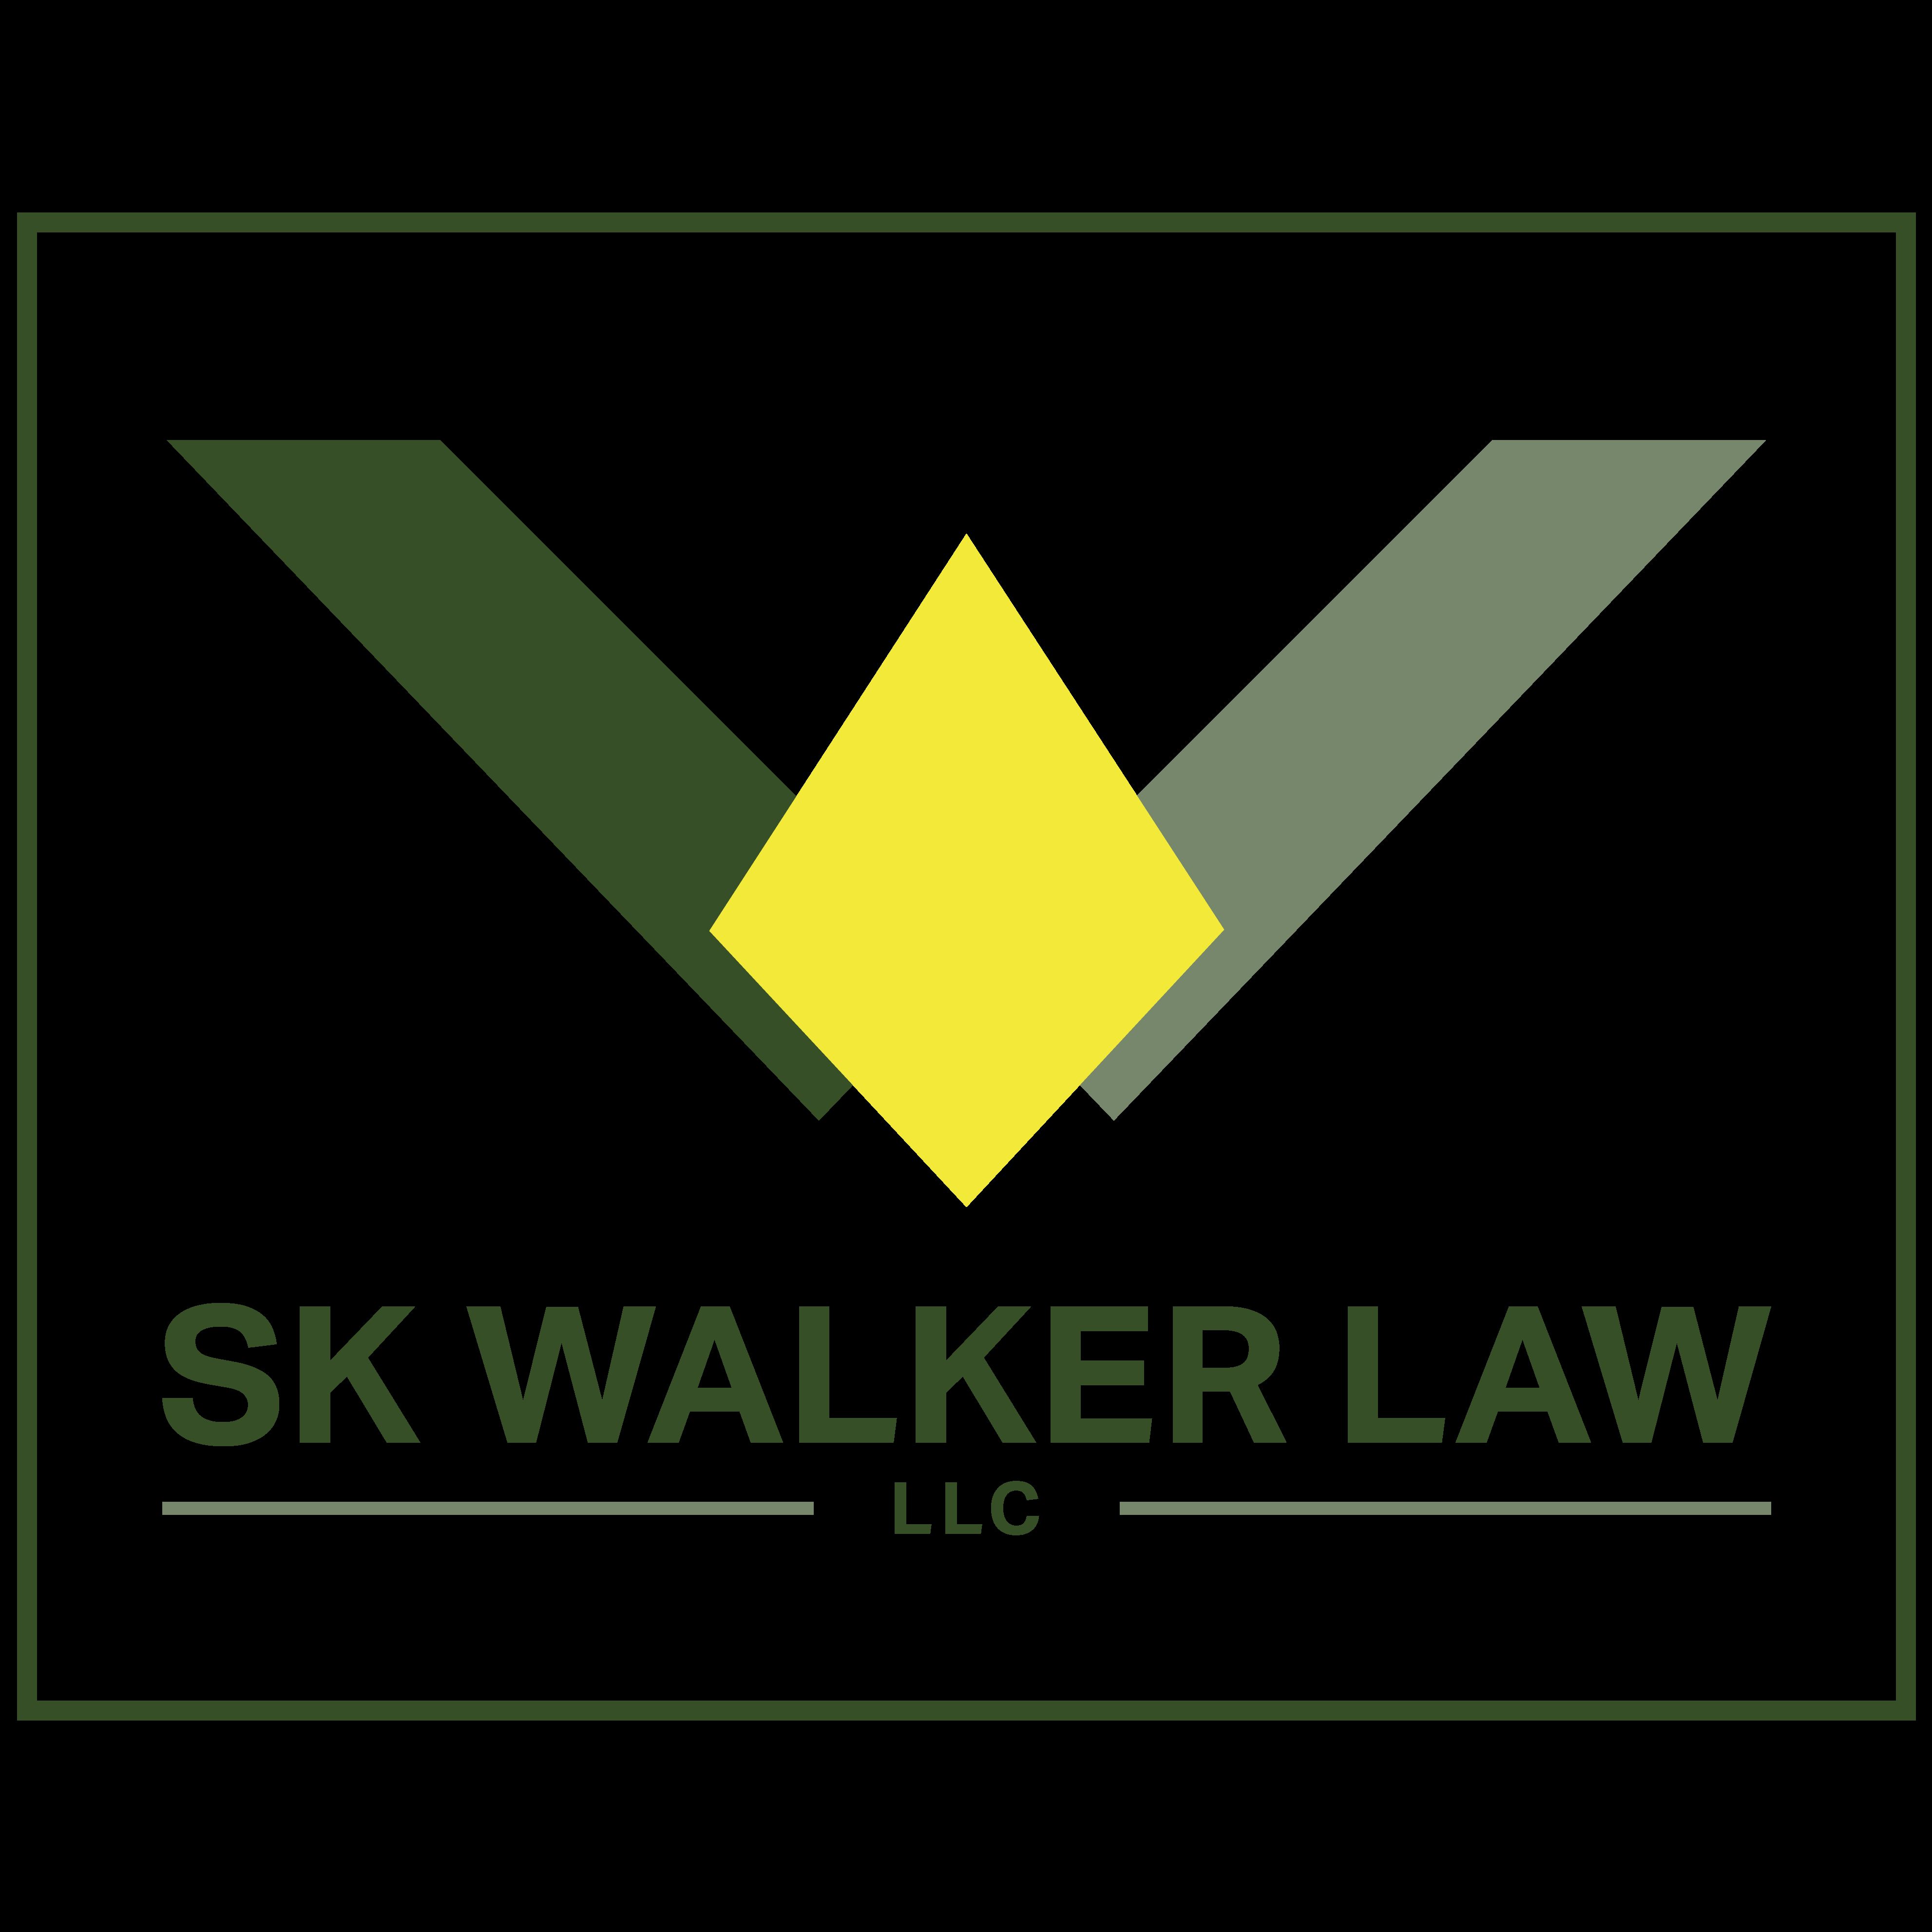 Business Law in Marion, Illinois